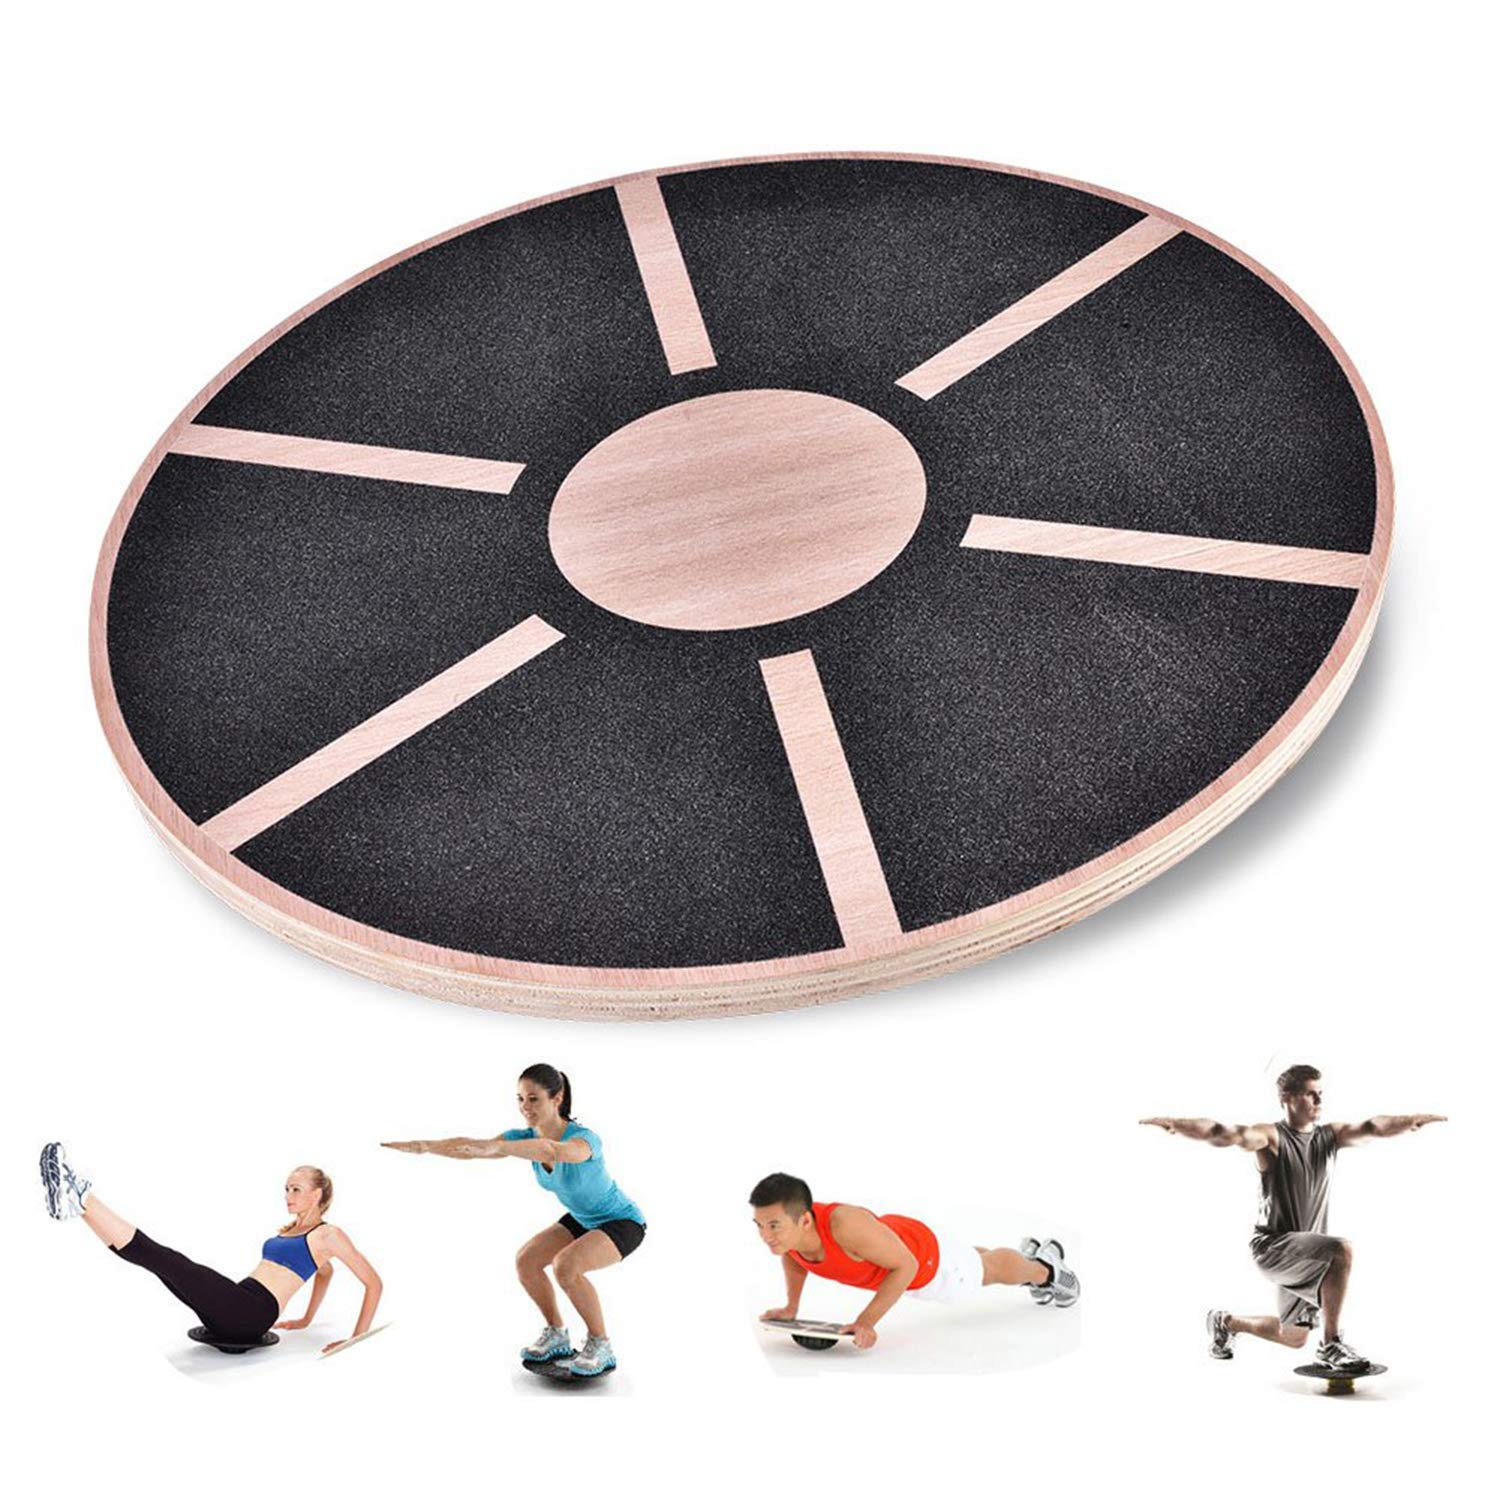 Exercise Balance Stability Trainer Portable Anti-Slip Wood Wobble Balance Board for Fitness Training Rehabilitation Exercise Wobble Balance Board